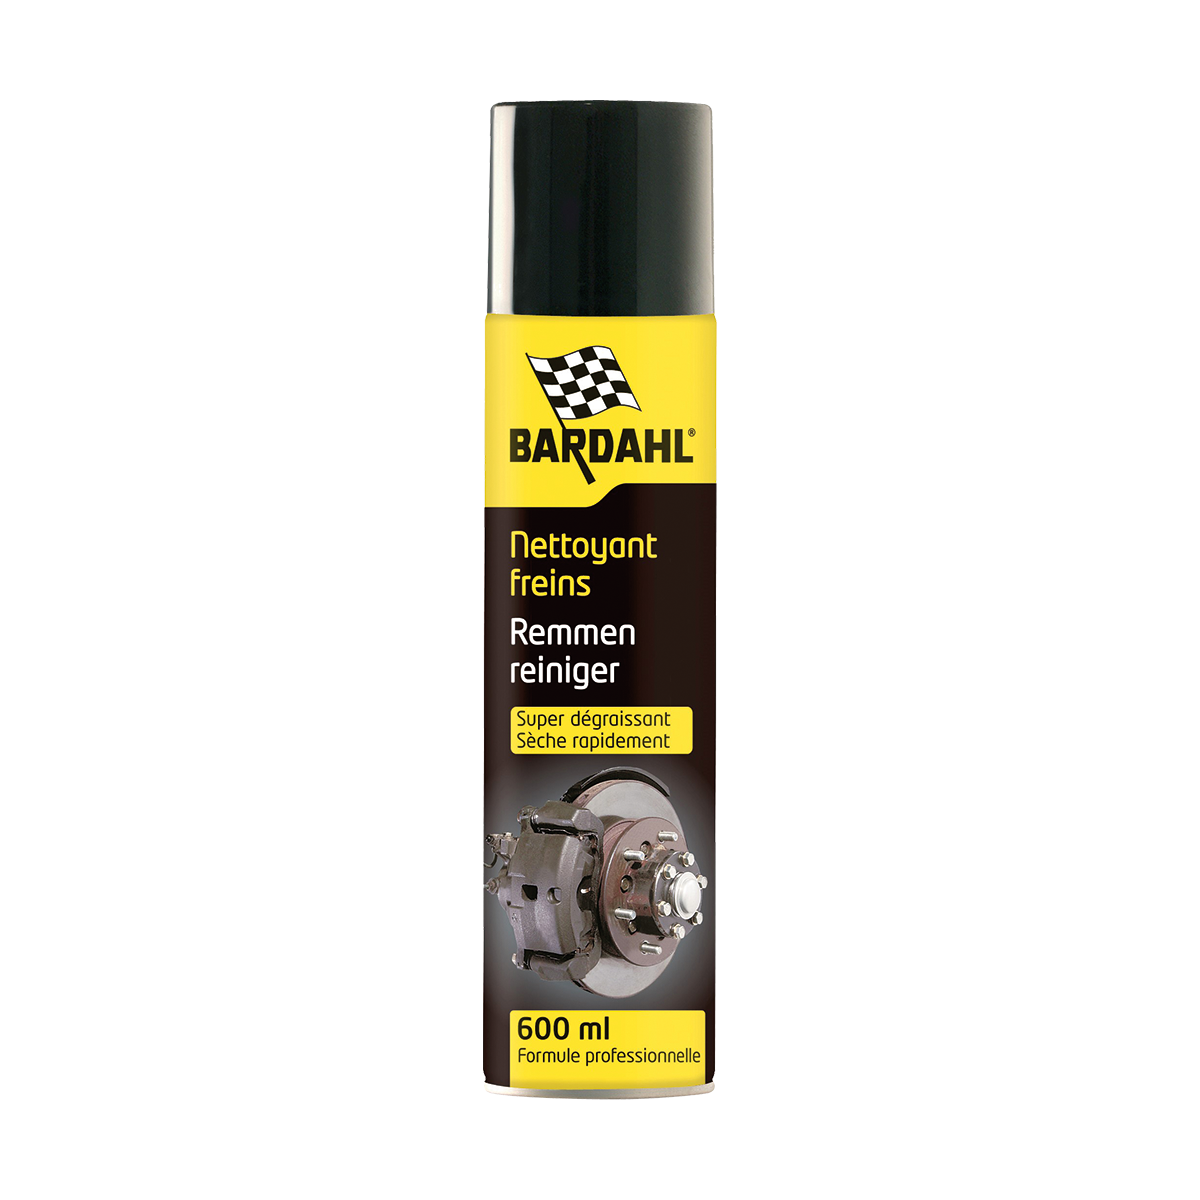 Nettoyant freins, carburateur, chaine, multi-usages, spray 600ml